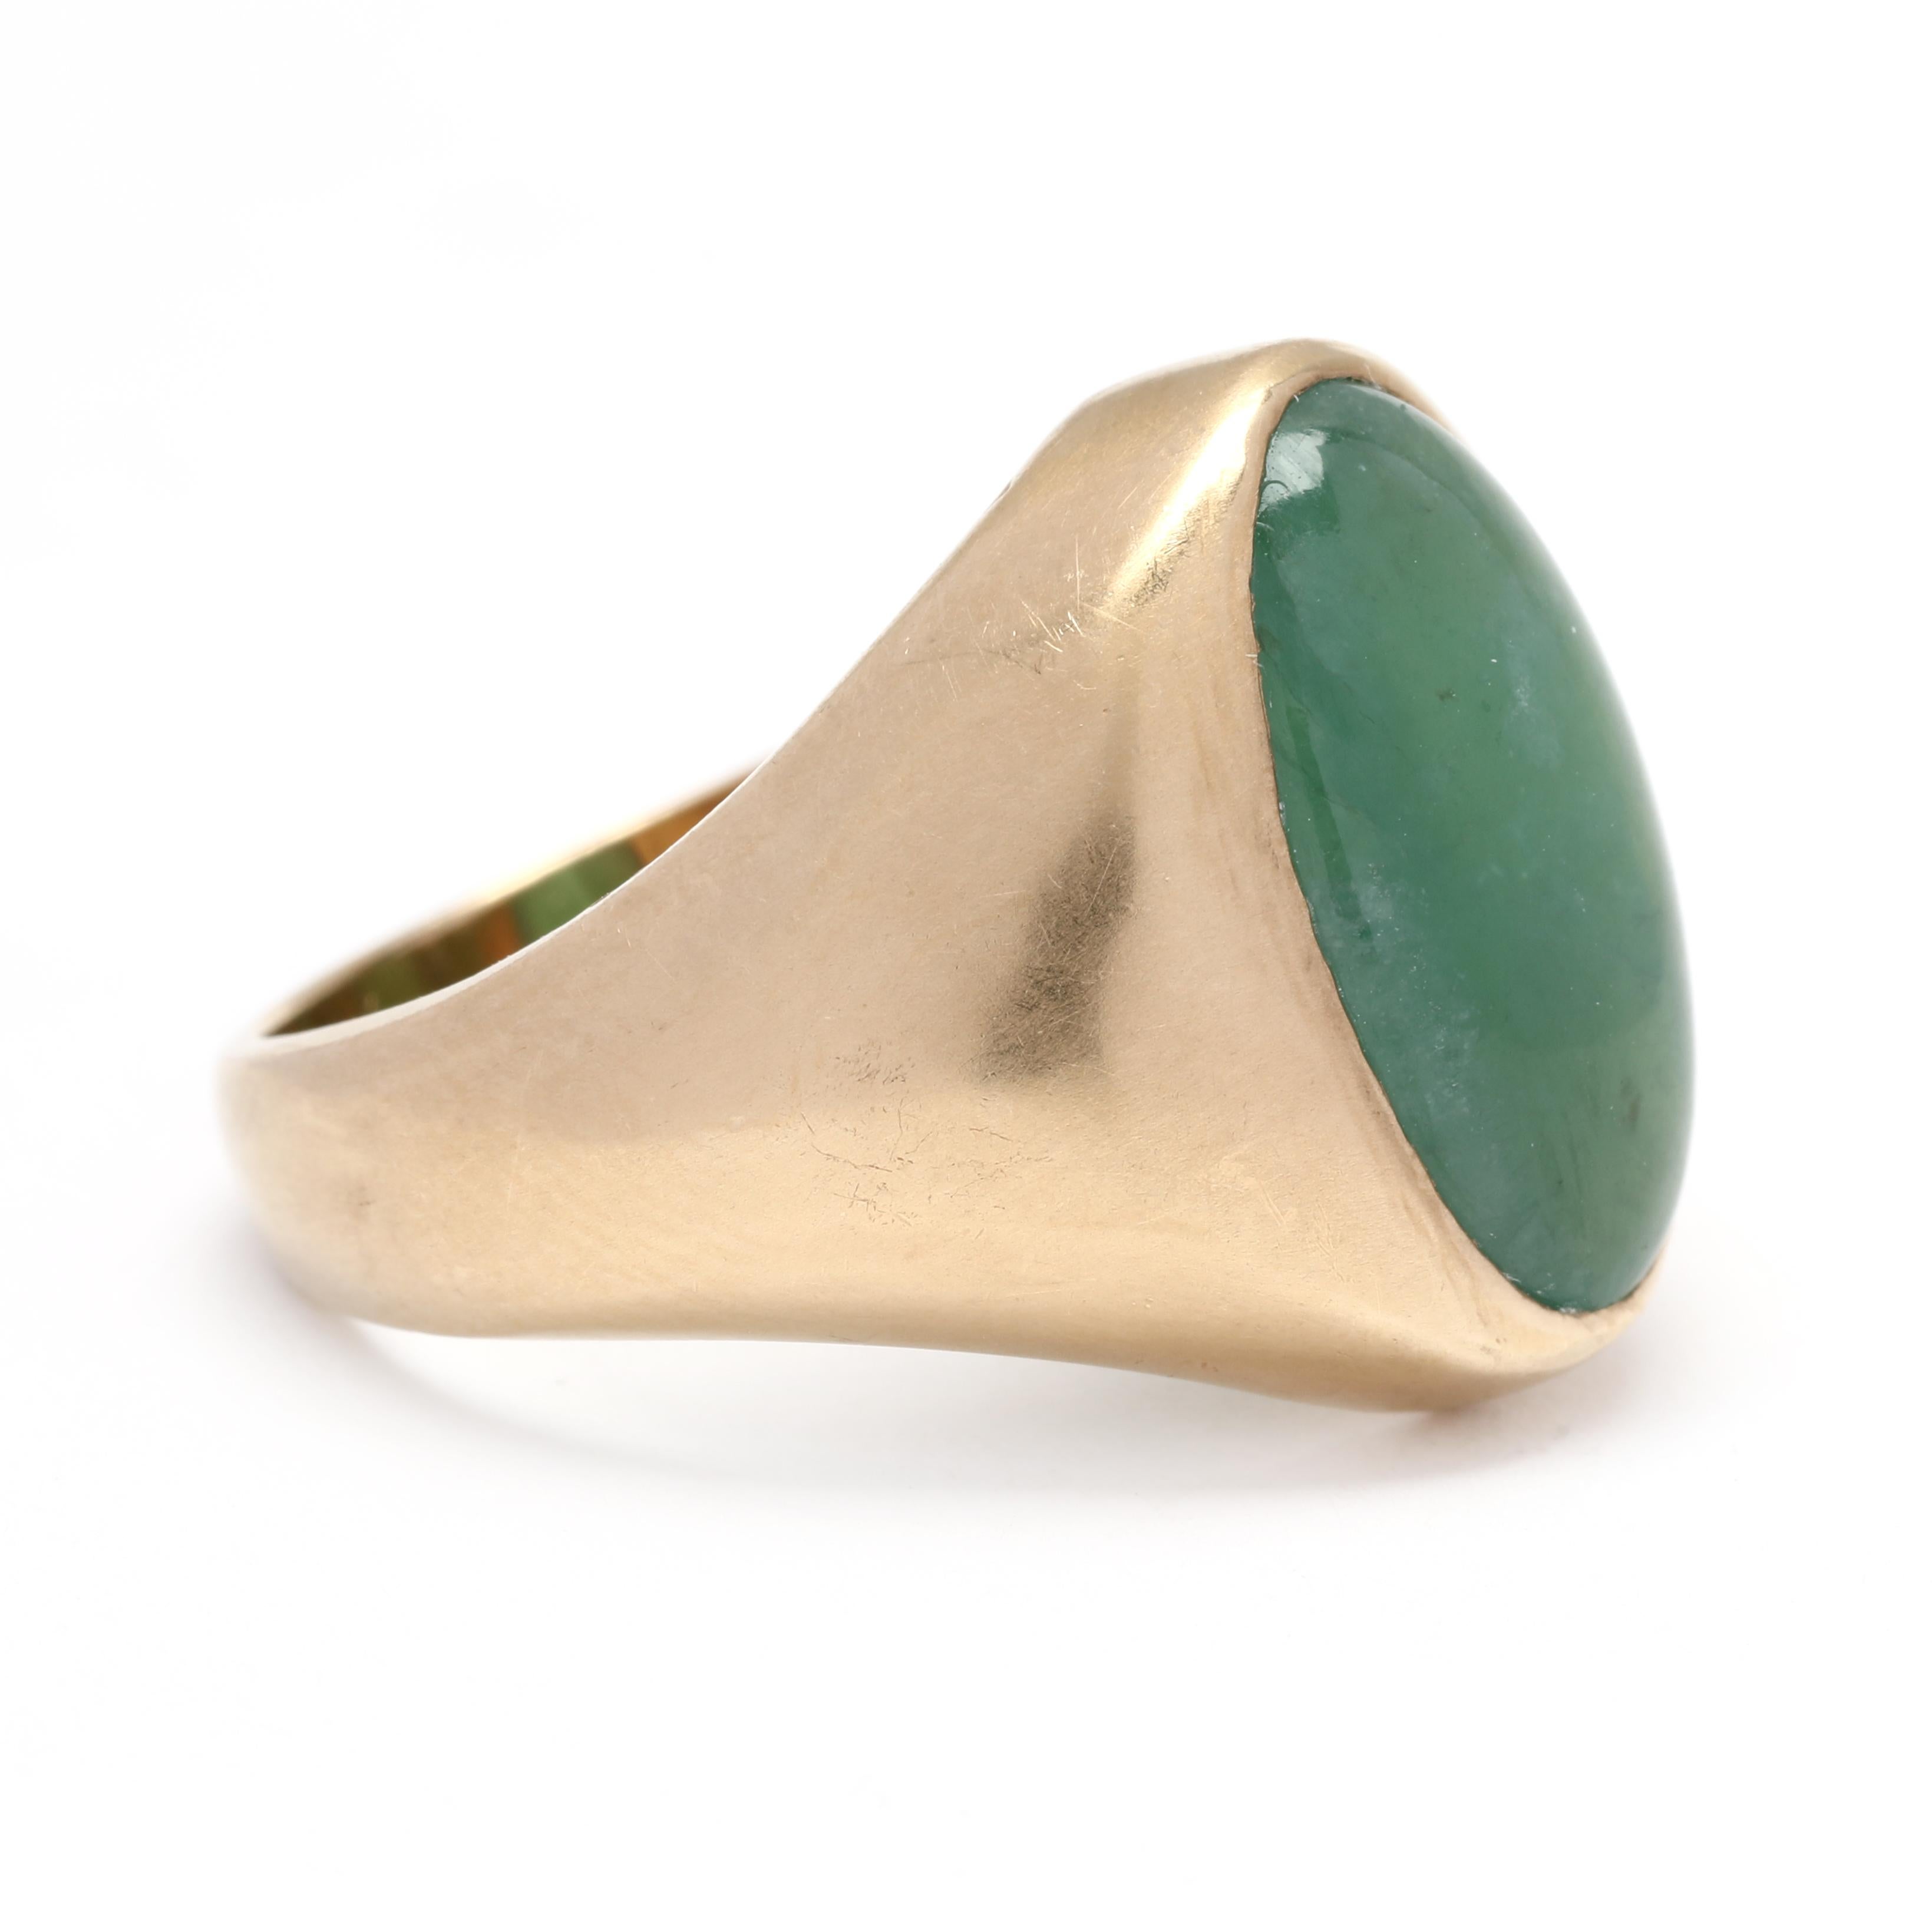 This exquisite and timeless oval jadeite jade signet ring is a show-stopper! The gemstone is a translucent green jadeite jade, and is set with a 14k yellow gold bezel. Its classic, masculine design makes it an ideal ring for a gentleman's wardrobe.